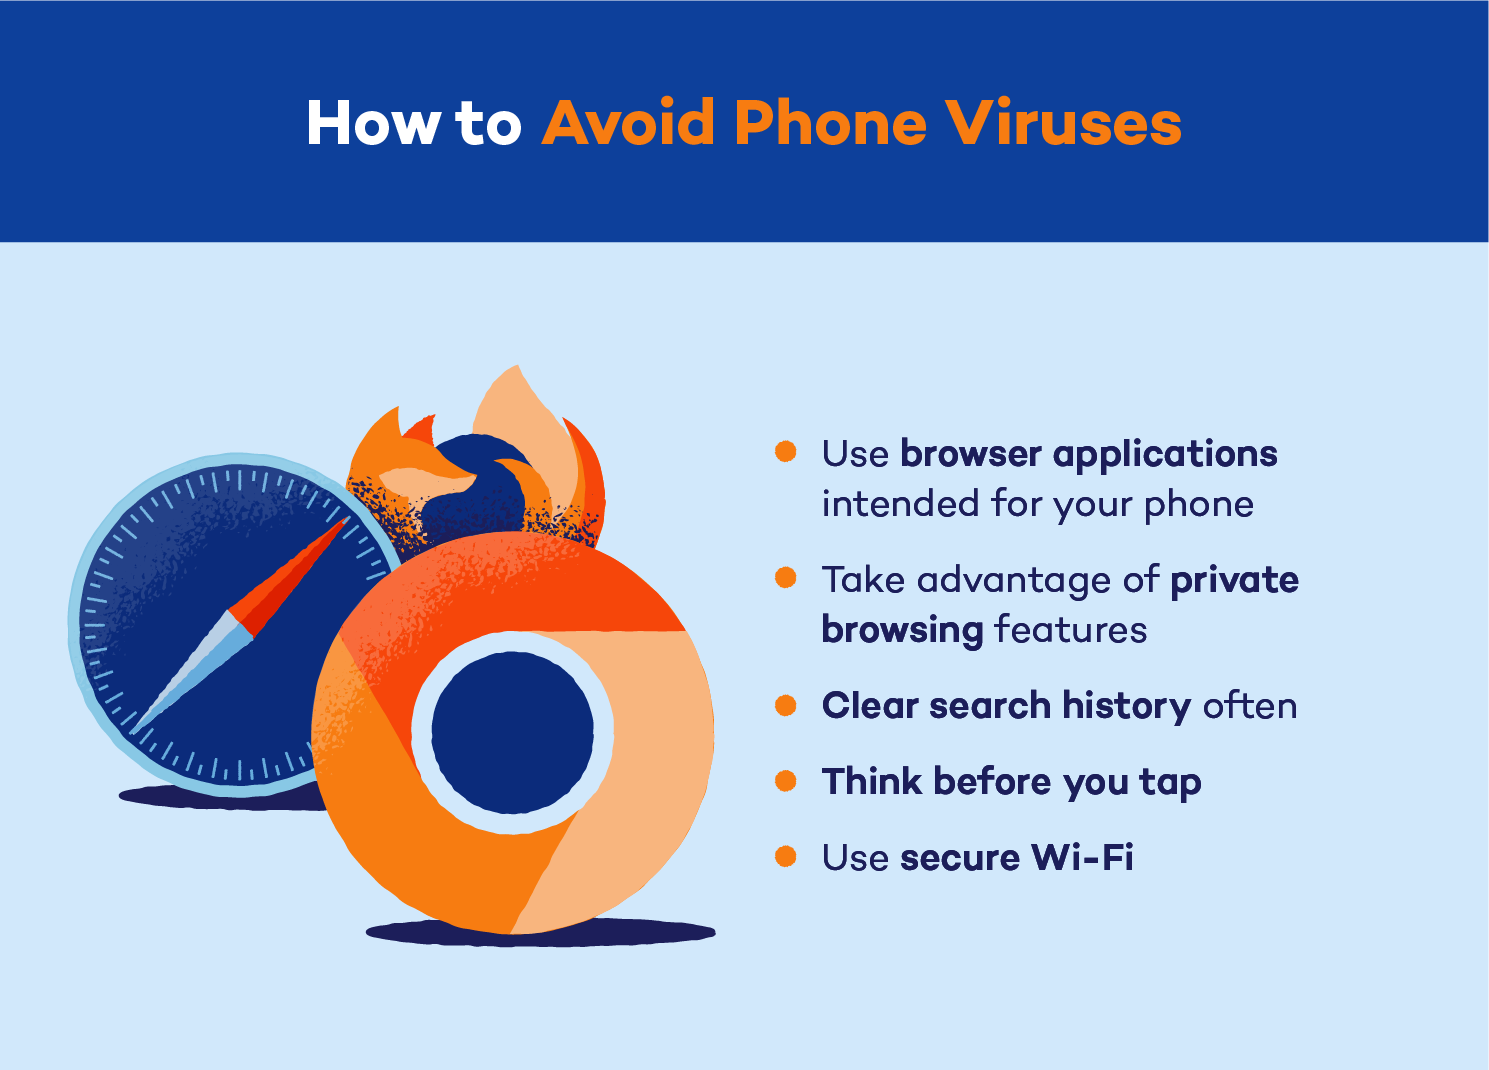 Illustration highlighting tips to avoid iPhone viruses: "How To Avoid iPhone Viruses - Use browser applications intended for your phone - Take advantage of private browsing features - Clear search history often - Think before you tap - Use secure Wi-Fi